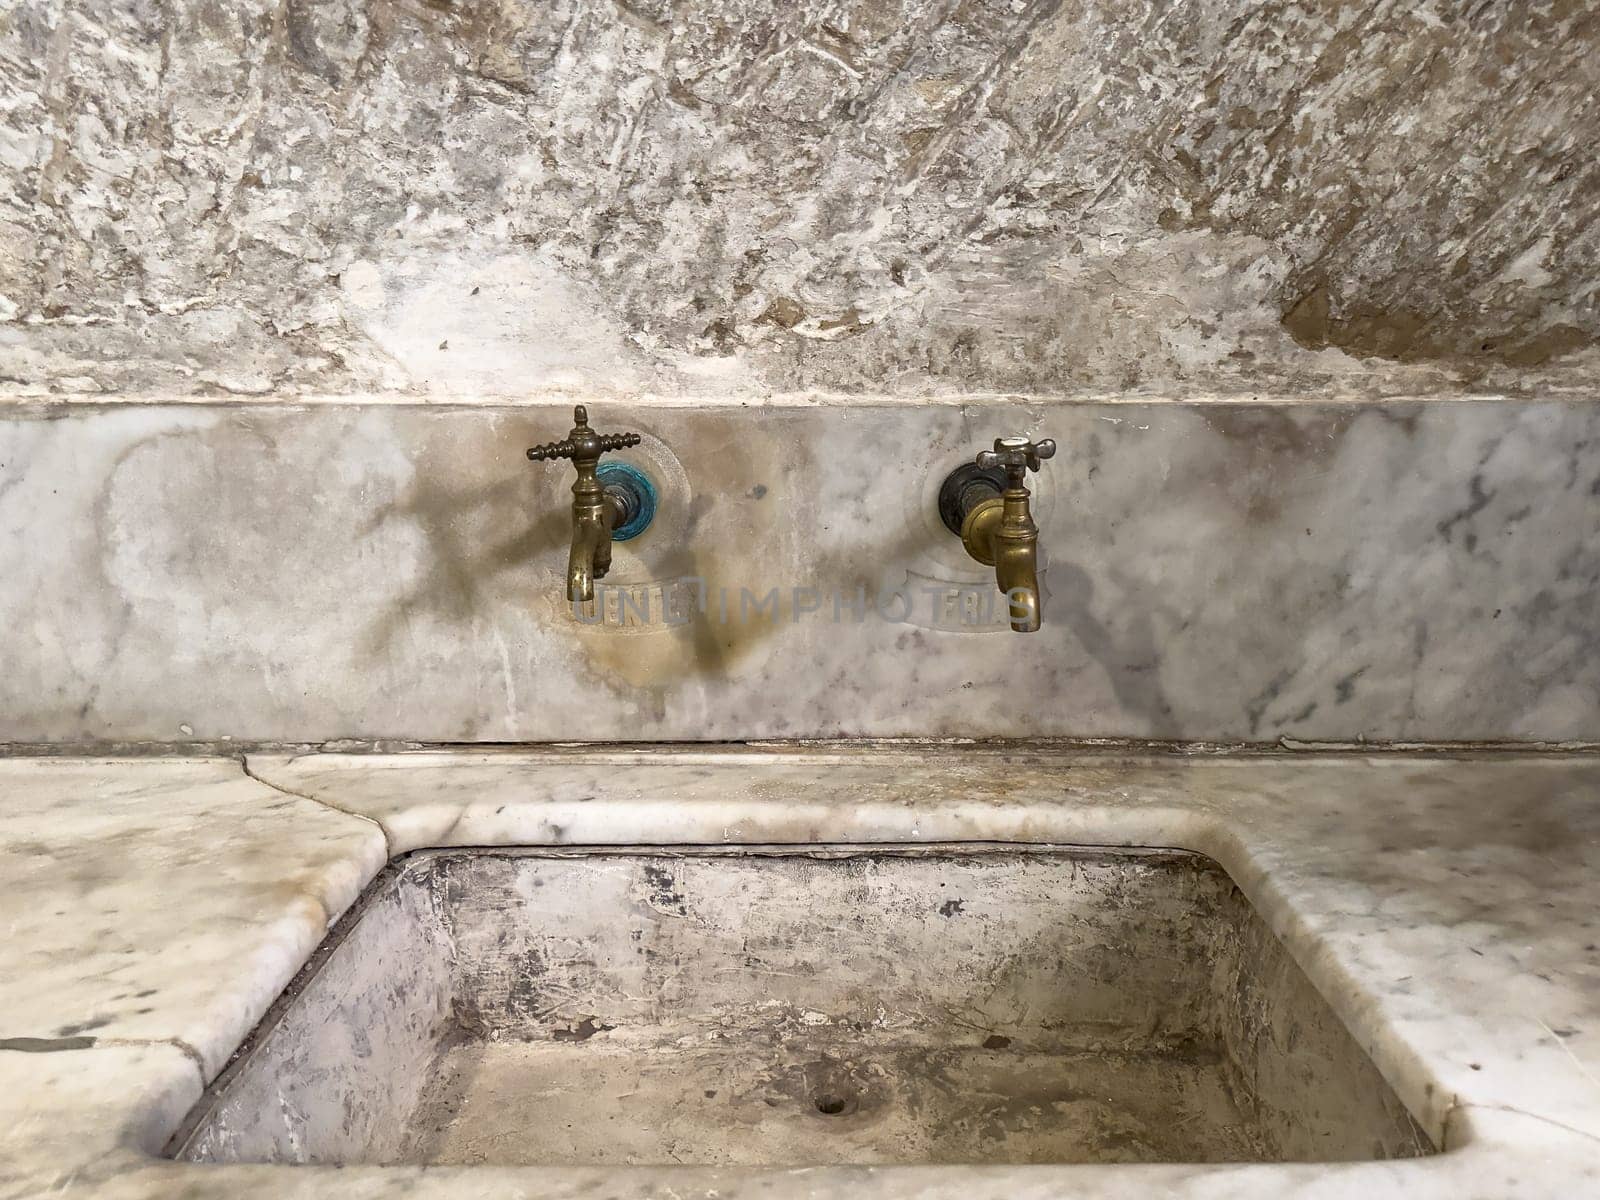 Aged marble sink with two brass taps, radiating historical charm and wear.